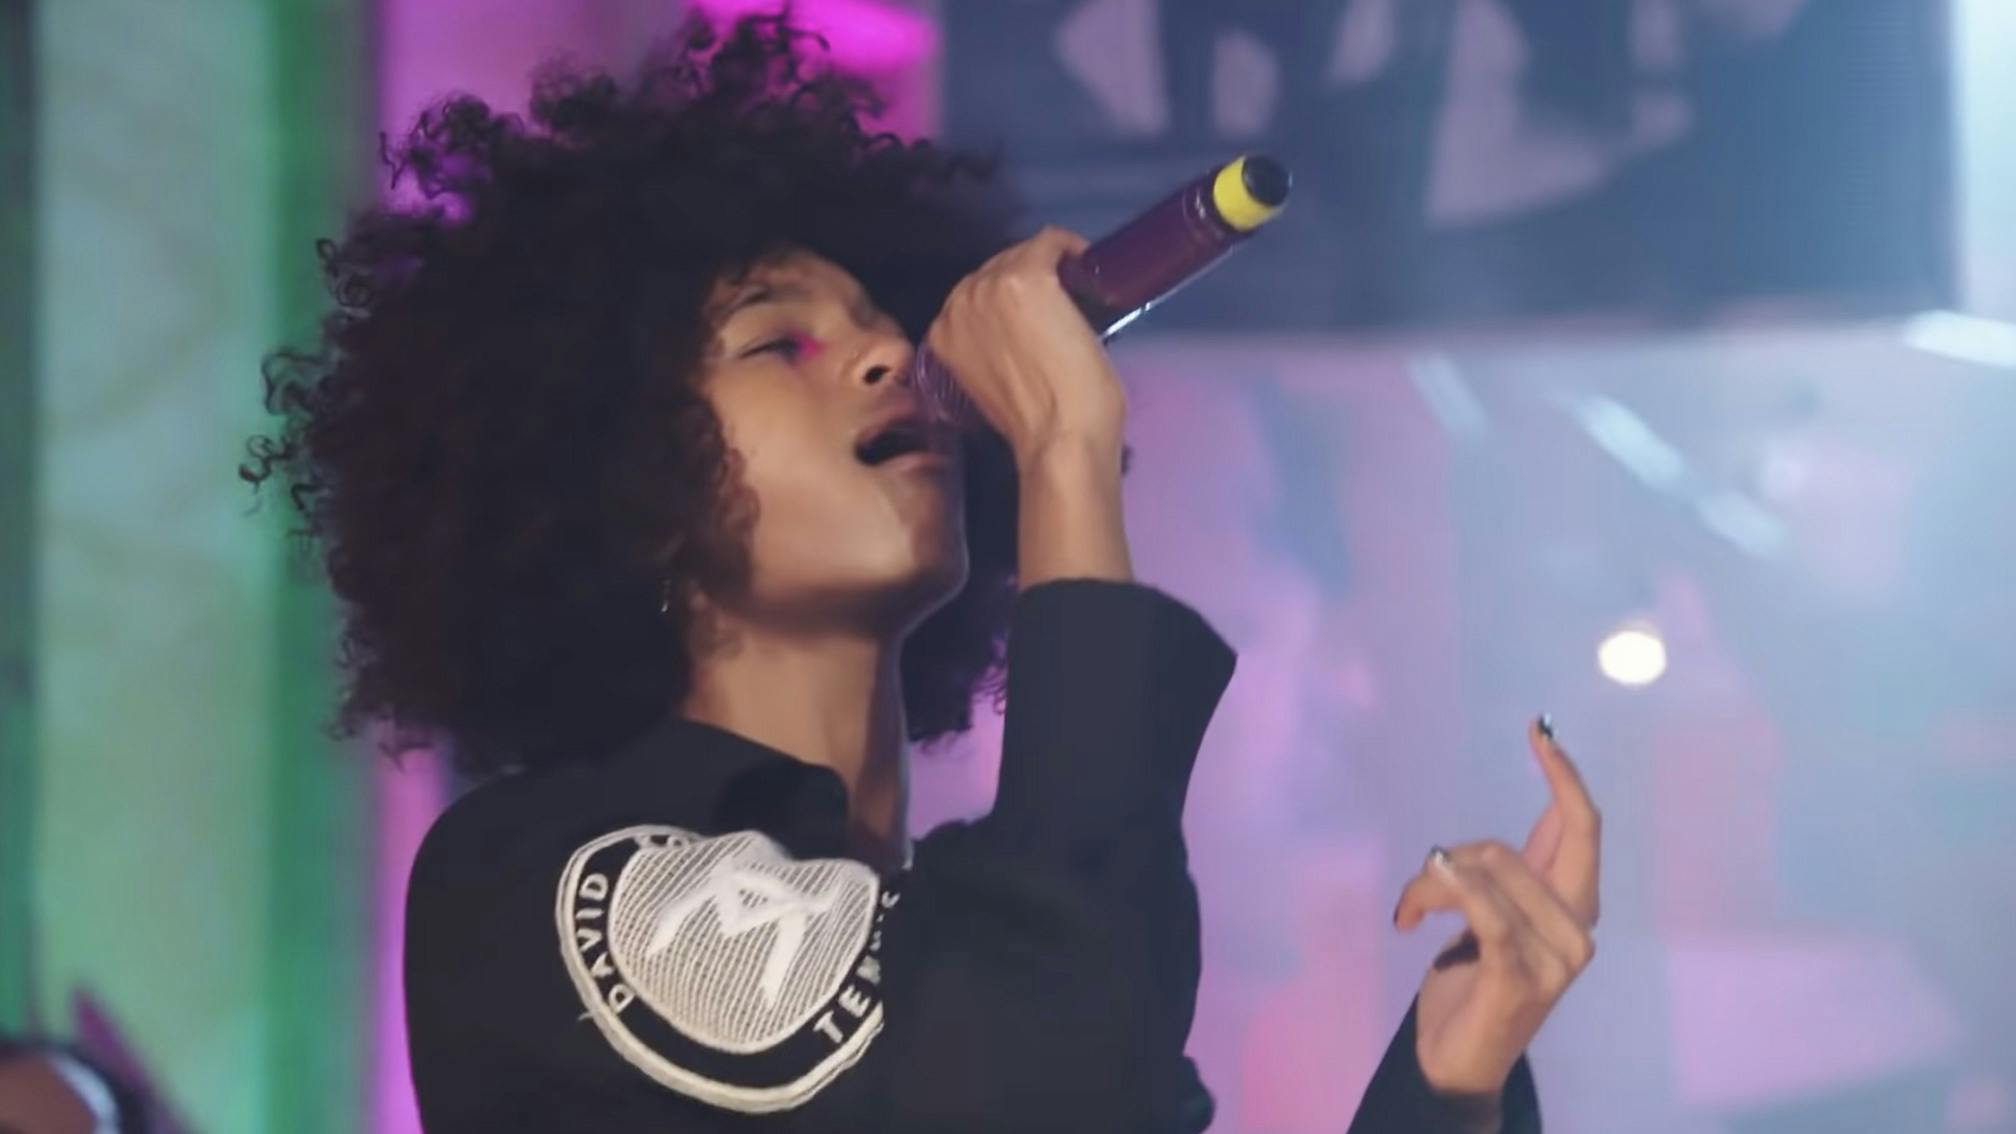 Watch WILLOW perform her new pop-punk single on The Tonight Show